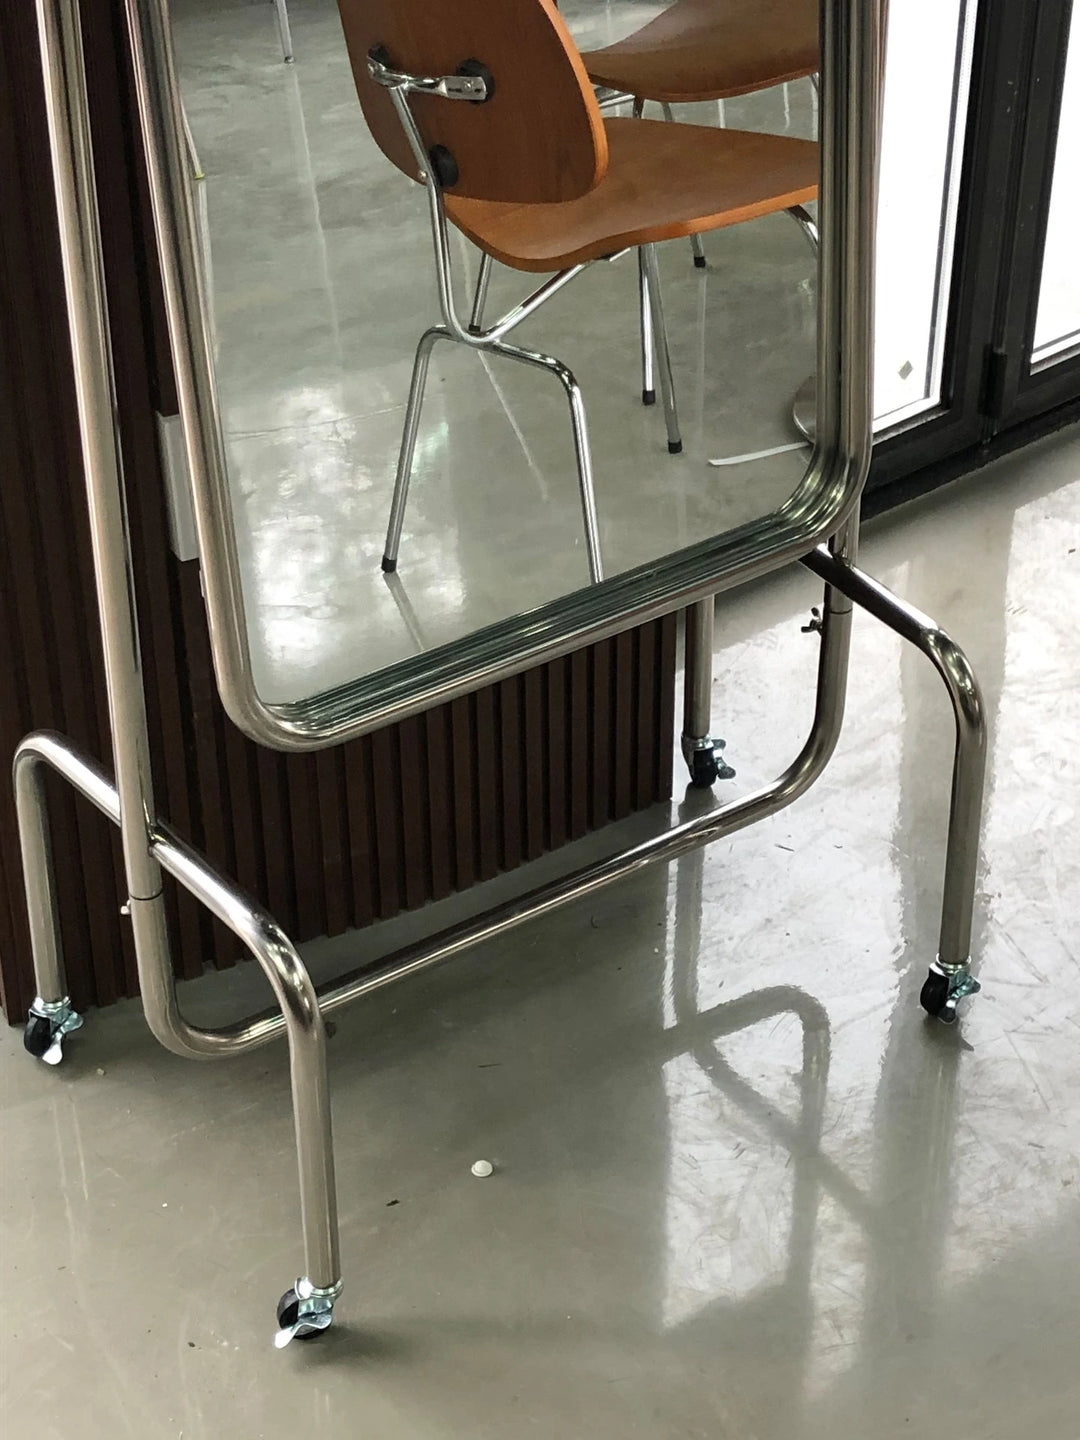 Movable full-length mirror stand